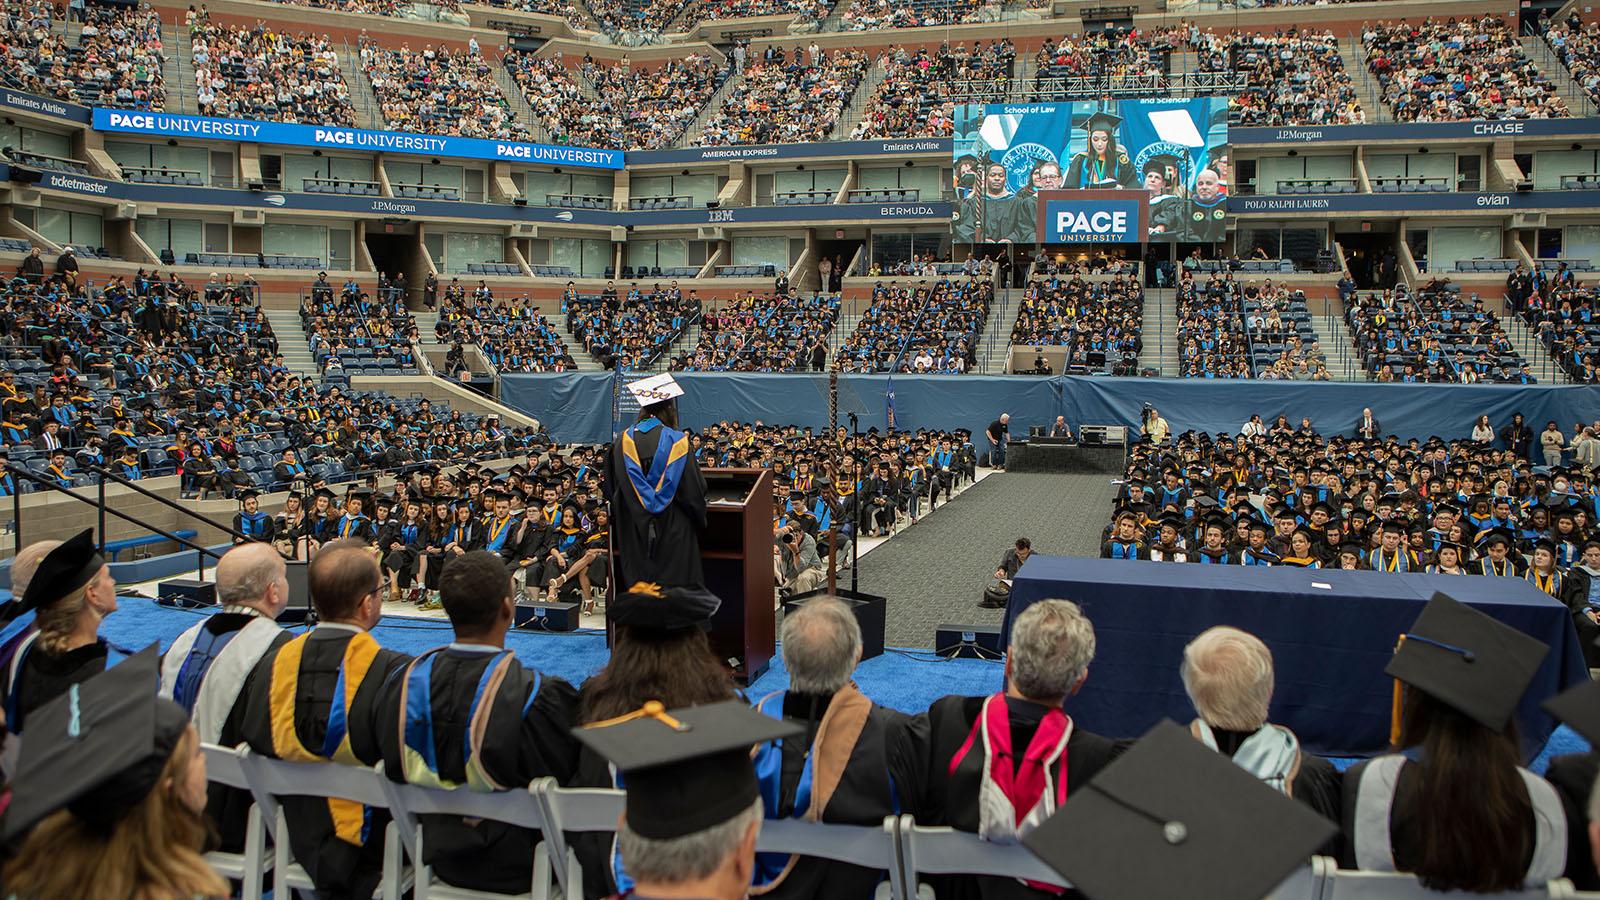 More than 15,000 graduates and guests attended Pace University’s first in-person Commencement Ceremony at the USTA Billie Jean King National Tennis Center on May 16, 2022.